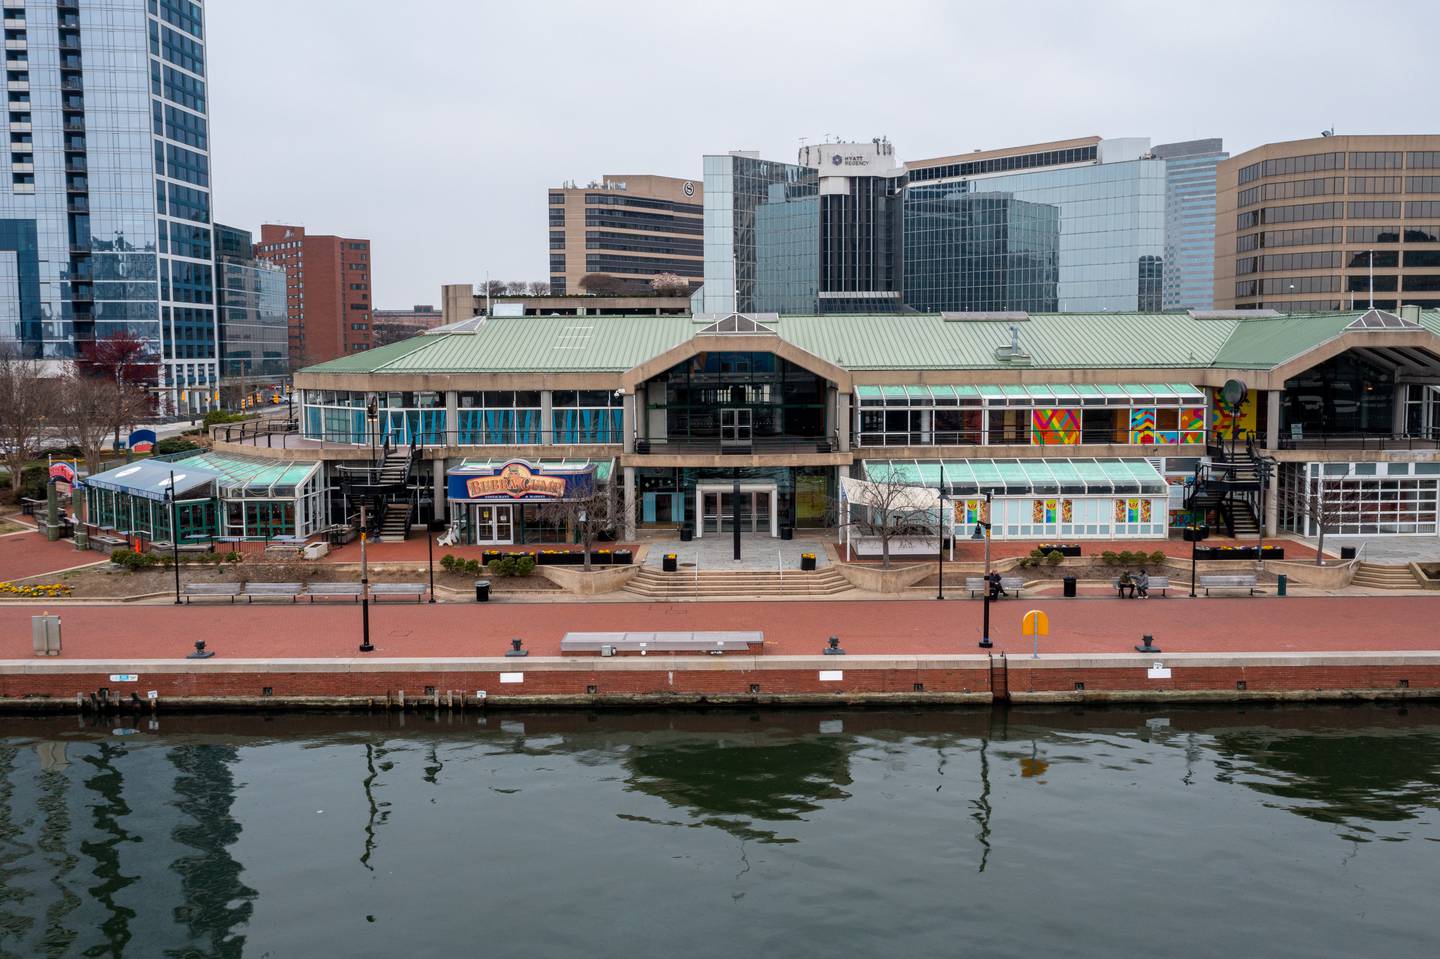 A view of Baltimore's Inner Harbor taken with a drone on Friday, March 17. Several property and business owners say they have concerns about the low levels of foot traffic in the district, which they need to stay in business.